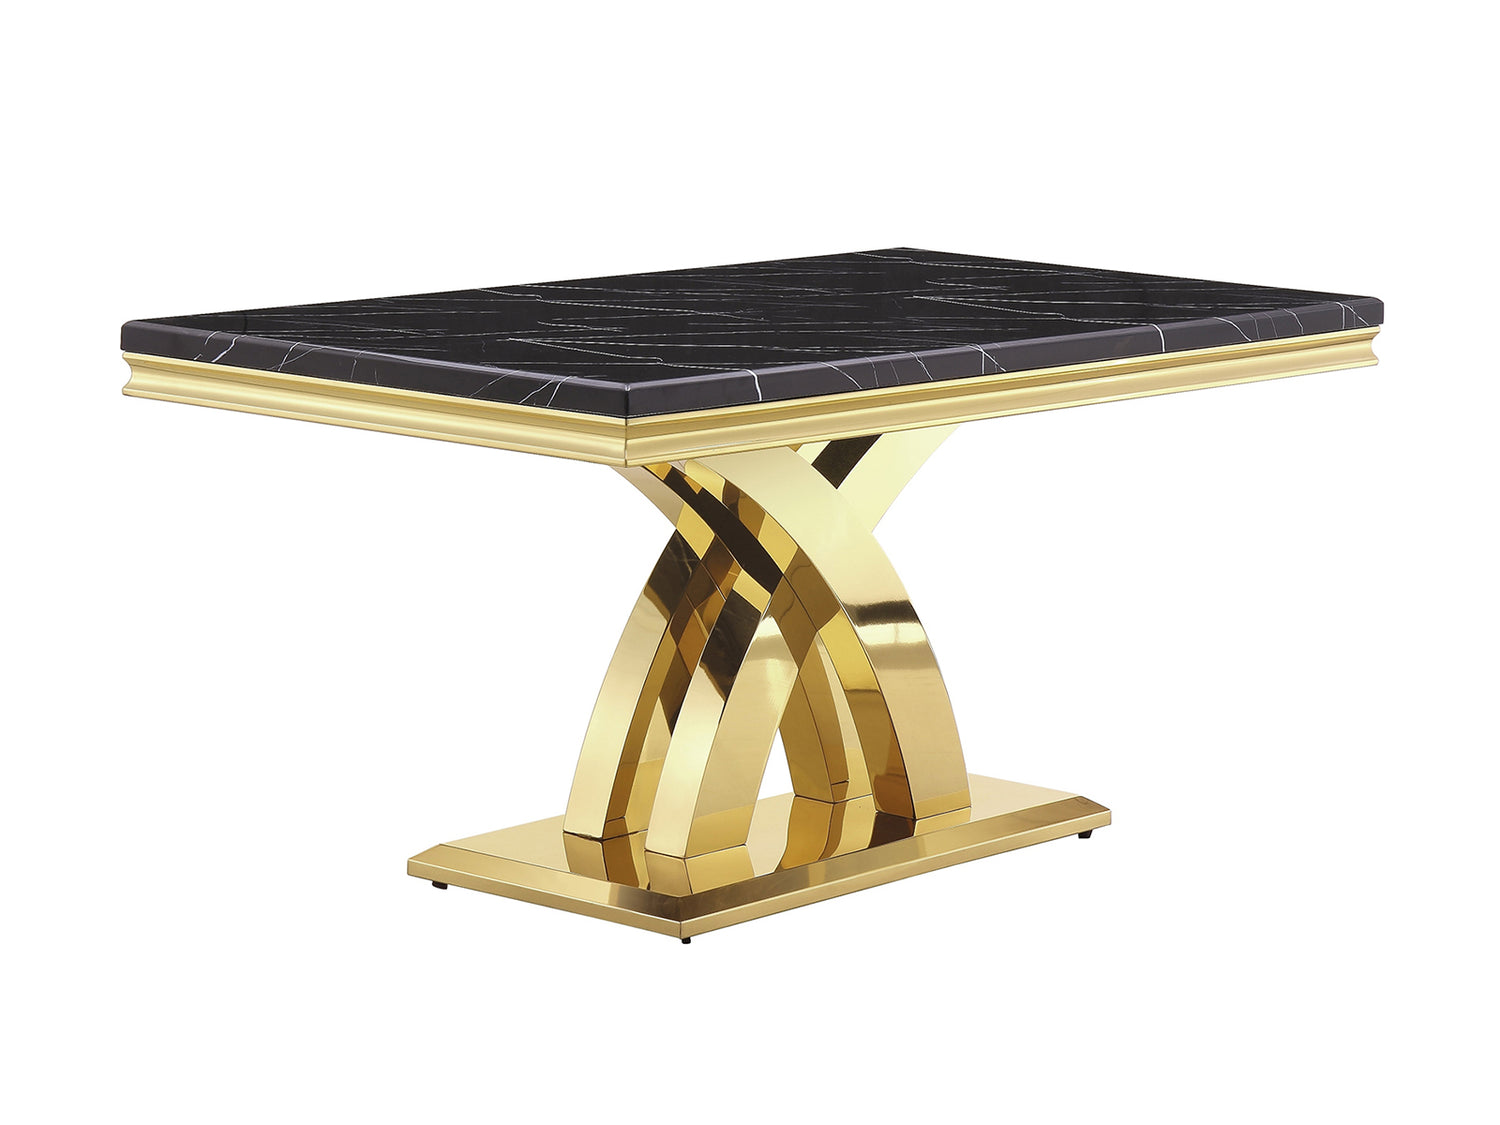 Gold and Black Dining Table - Style and Elegance